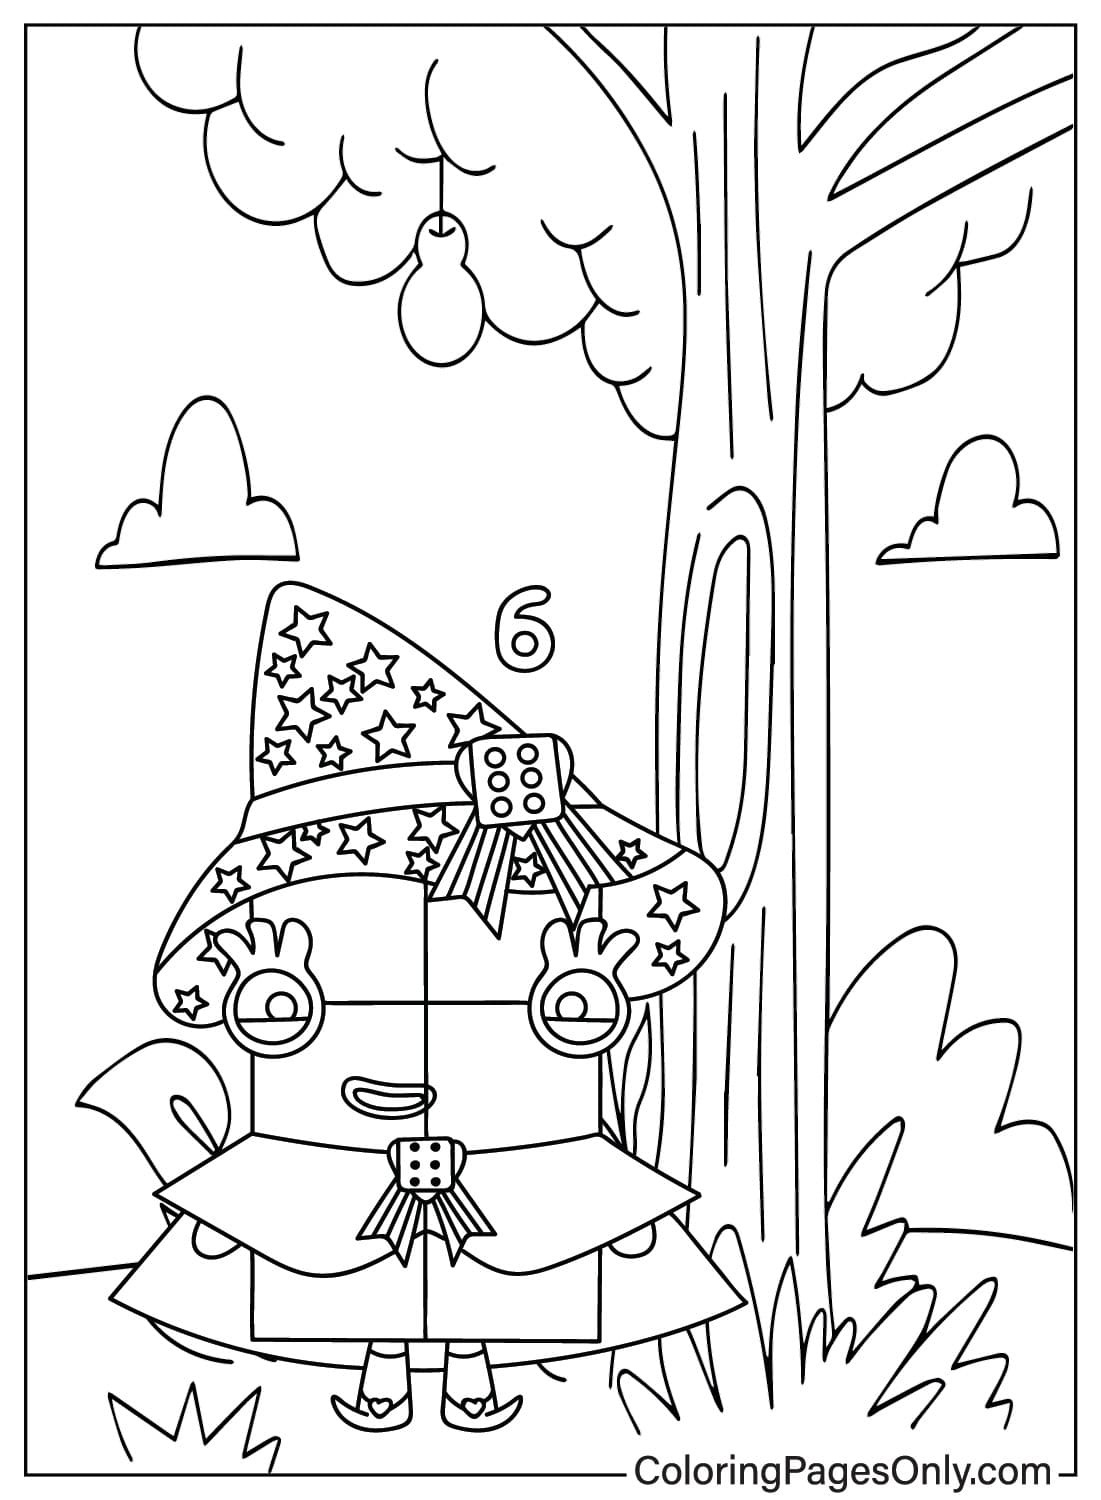 Numberblocks Six Coloring Page Coloring Page